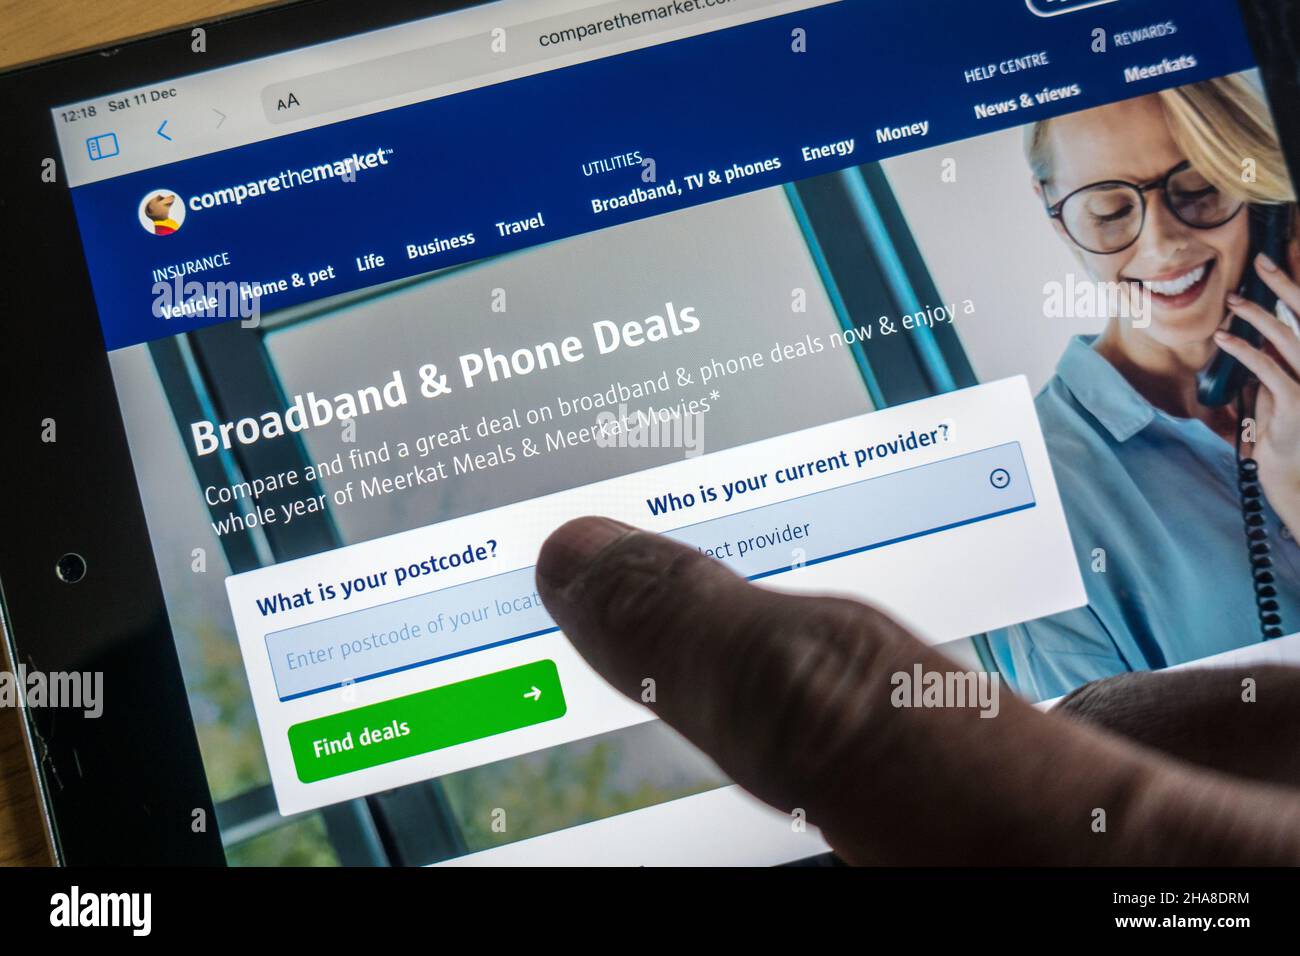 Broadband and Phone deals on CompareTheMarket site operated by Adult male finger on a portable device Stock Photo